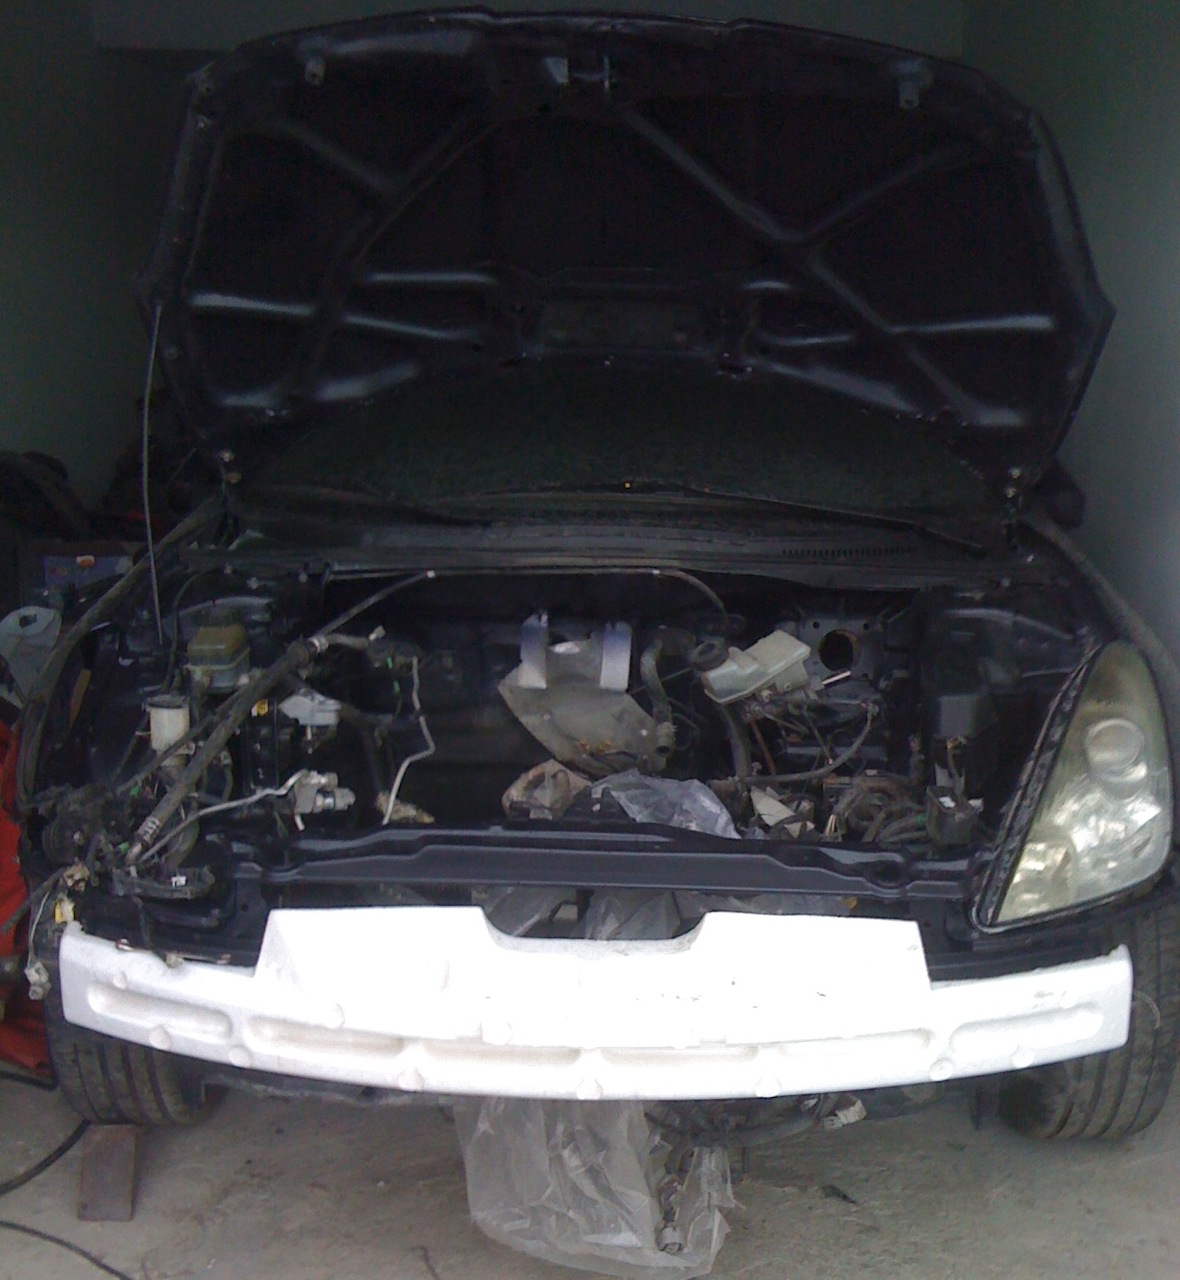 Buying a car and refurbishment - Toyota Celica 18 L 2000